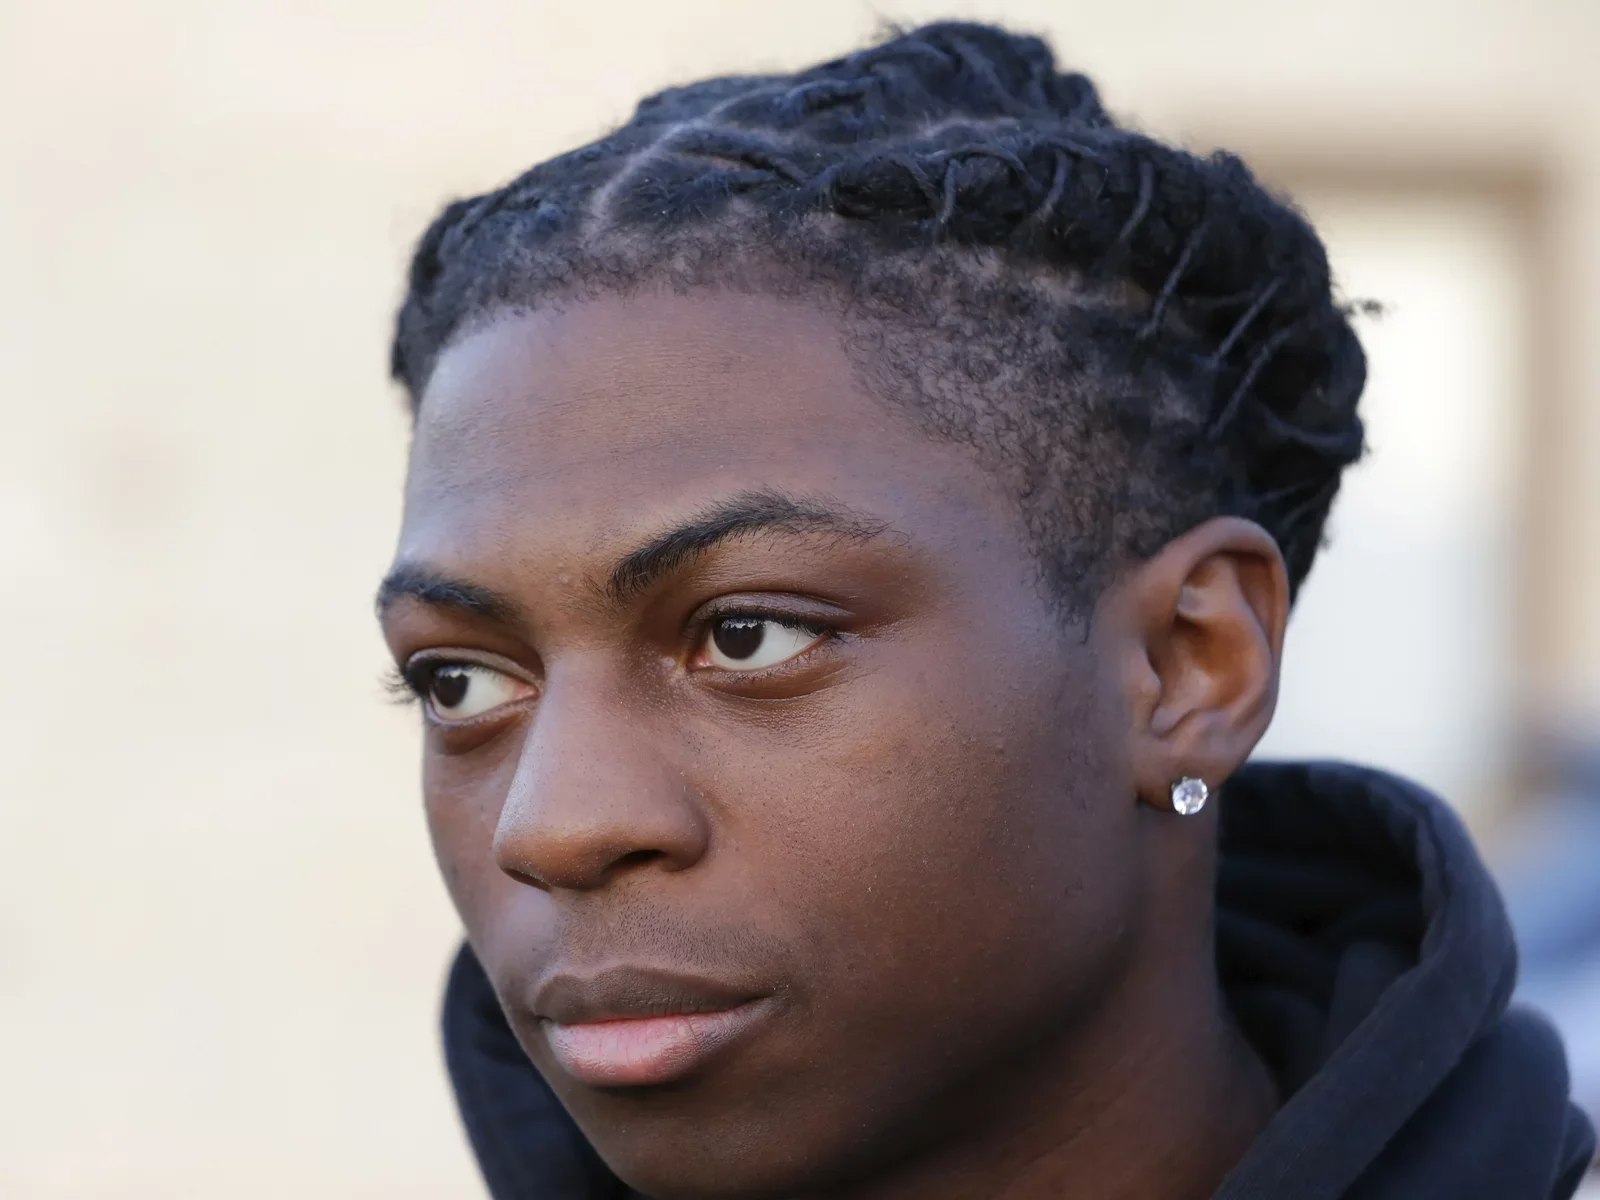 A Black Texas High School Student Has Been Suspended Again For Refusing To Cut His Locs